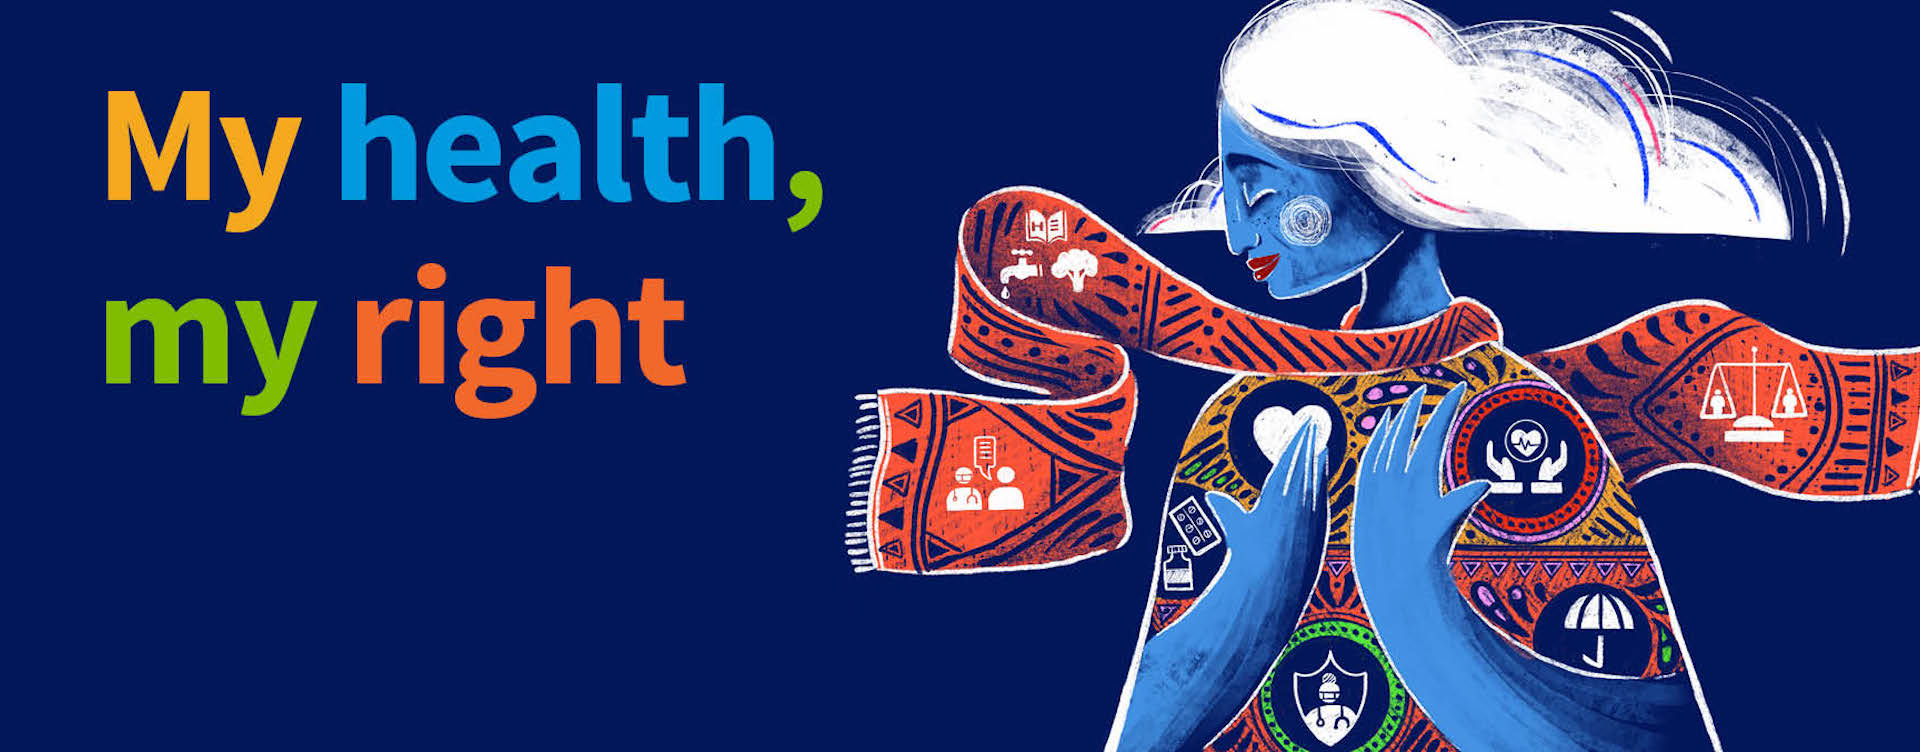 World Health Day banner for 2024 with the slogan "My health, my right" (Courtesy of WHO)